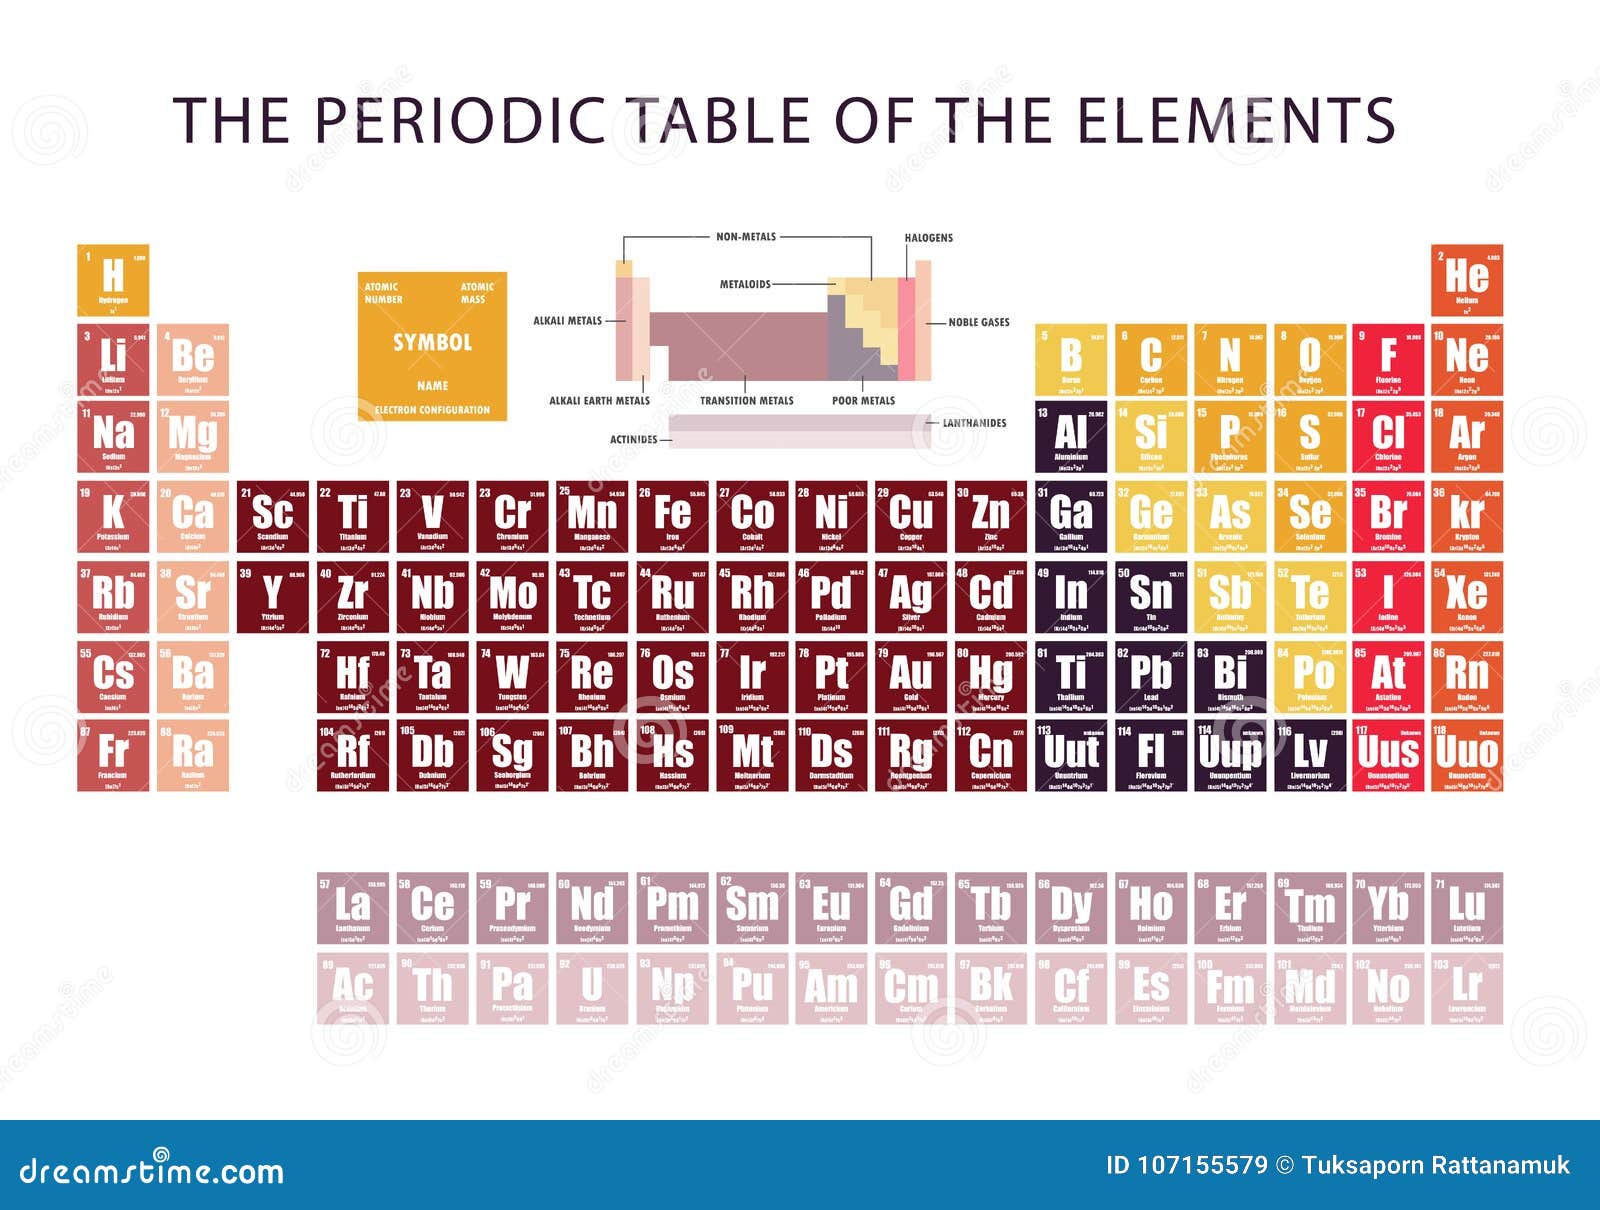 What Are Valence Electrons? Definition and Periodic Table